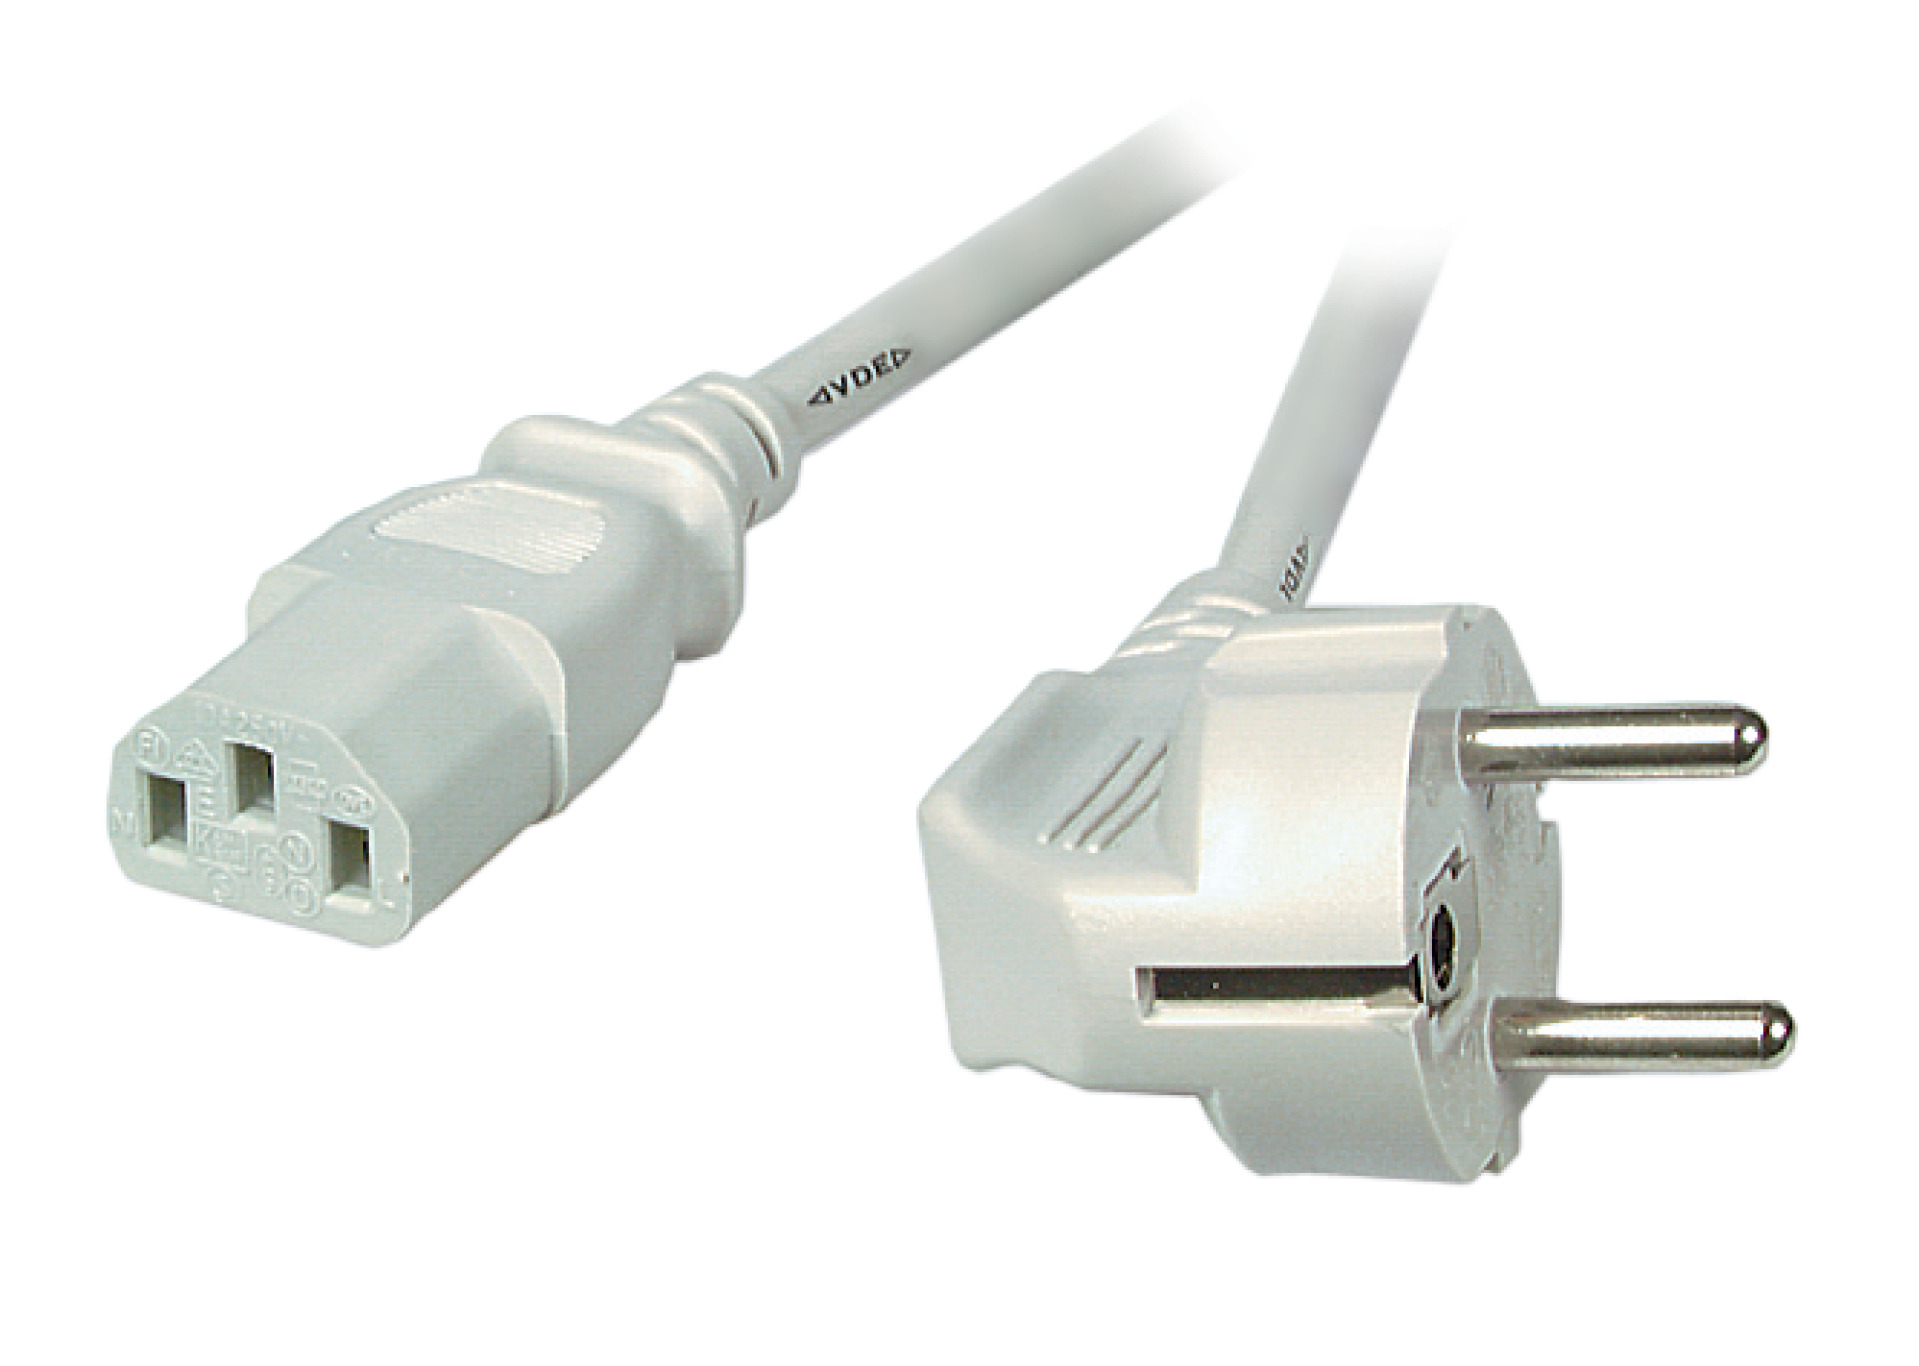 Power Cable CEE7/7 90° - C13 180°, Grey, 2 m, 3 x 0.75 mm²